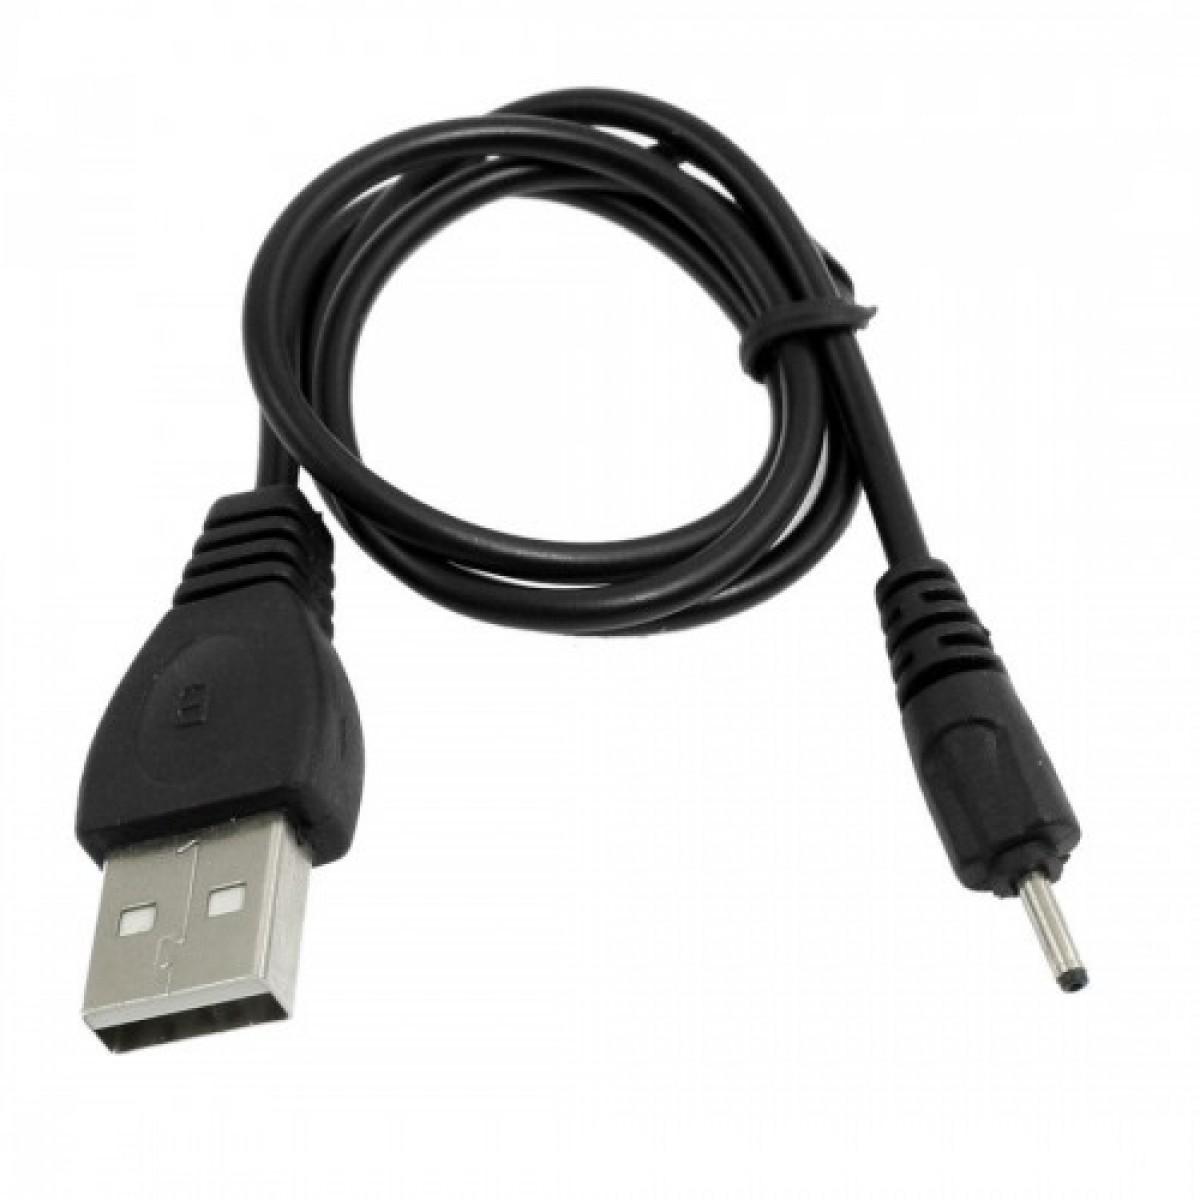 https://rcmmultimedia.com/storage/photos/1/Adapters + cables/bf5437a28b5e3be6c720099596aae9fb.jpg